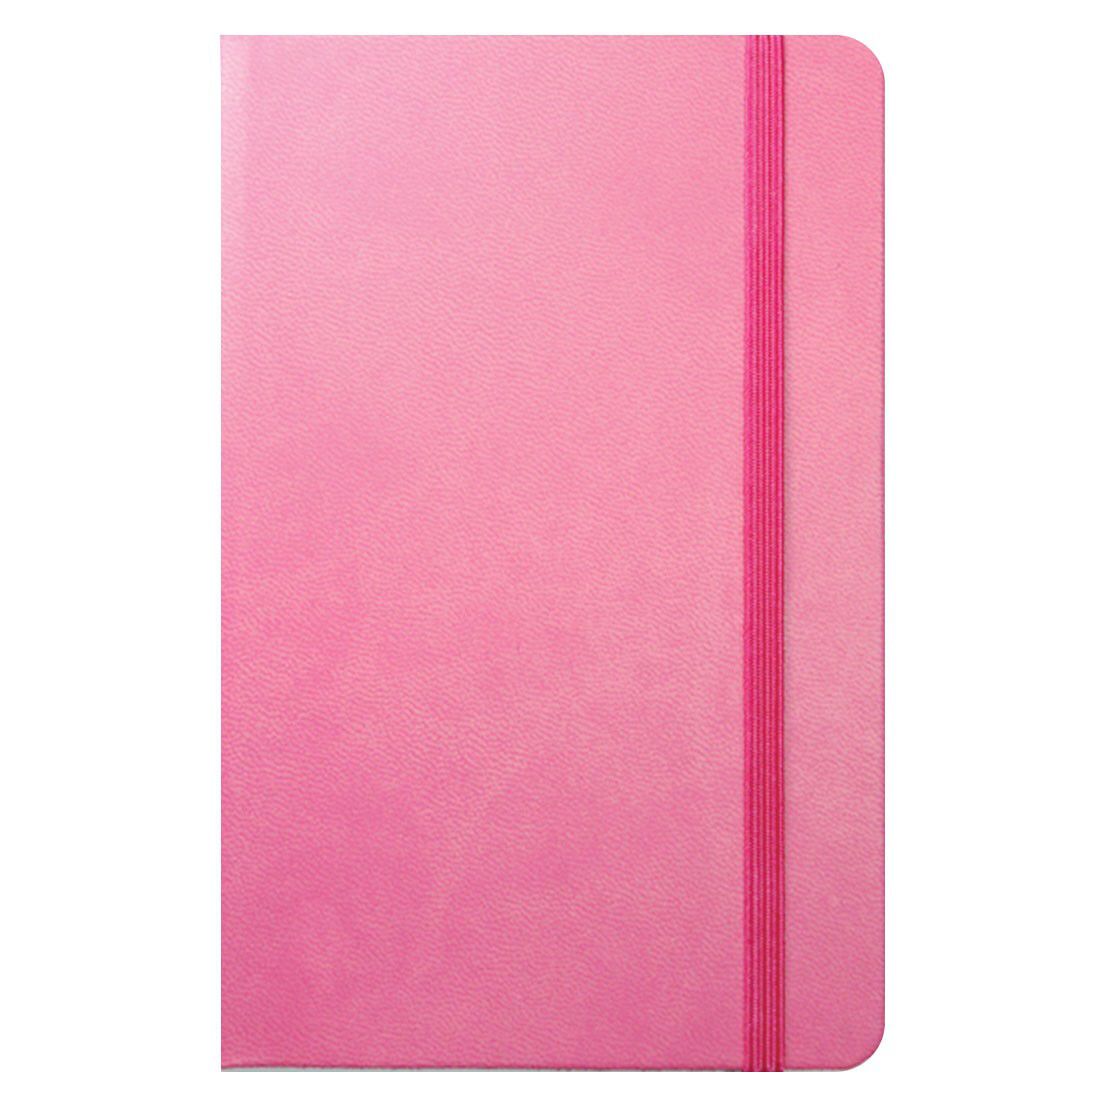 Small Flexi Ruled Notebook